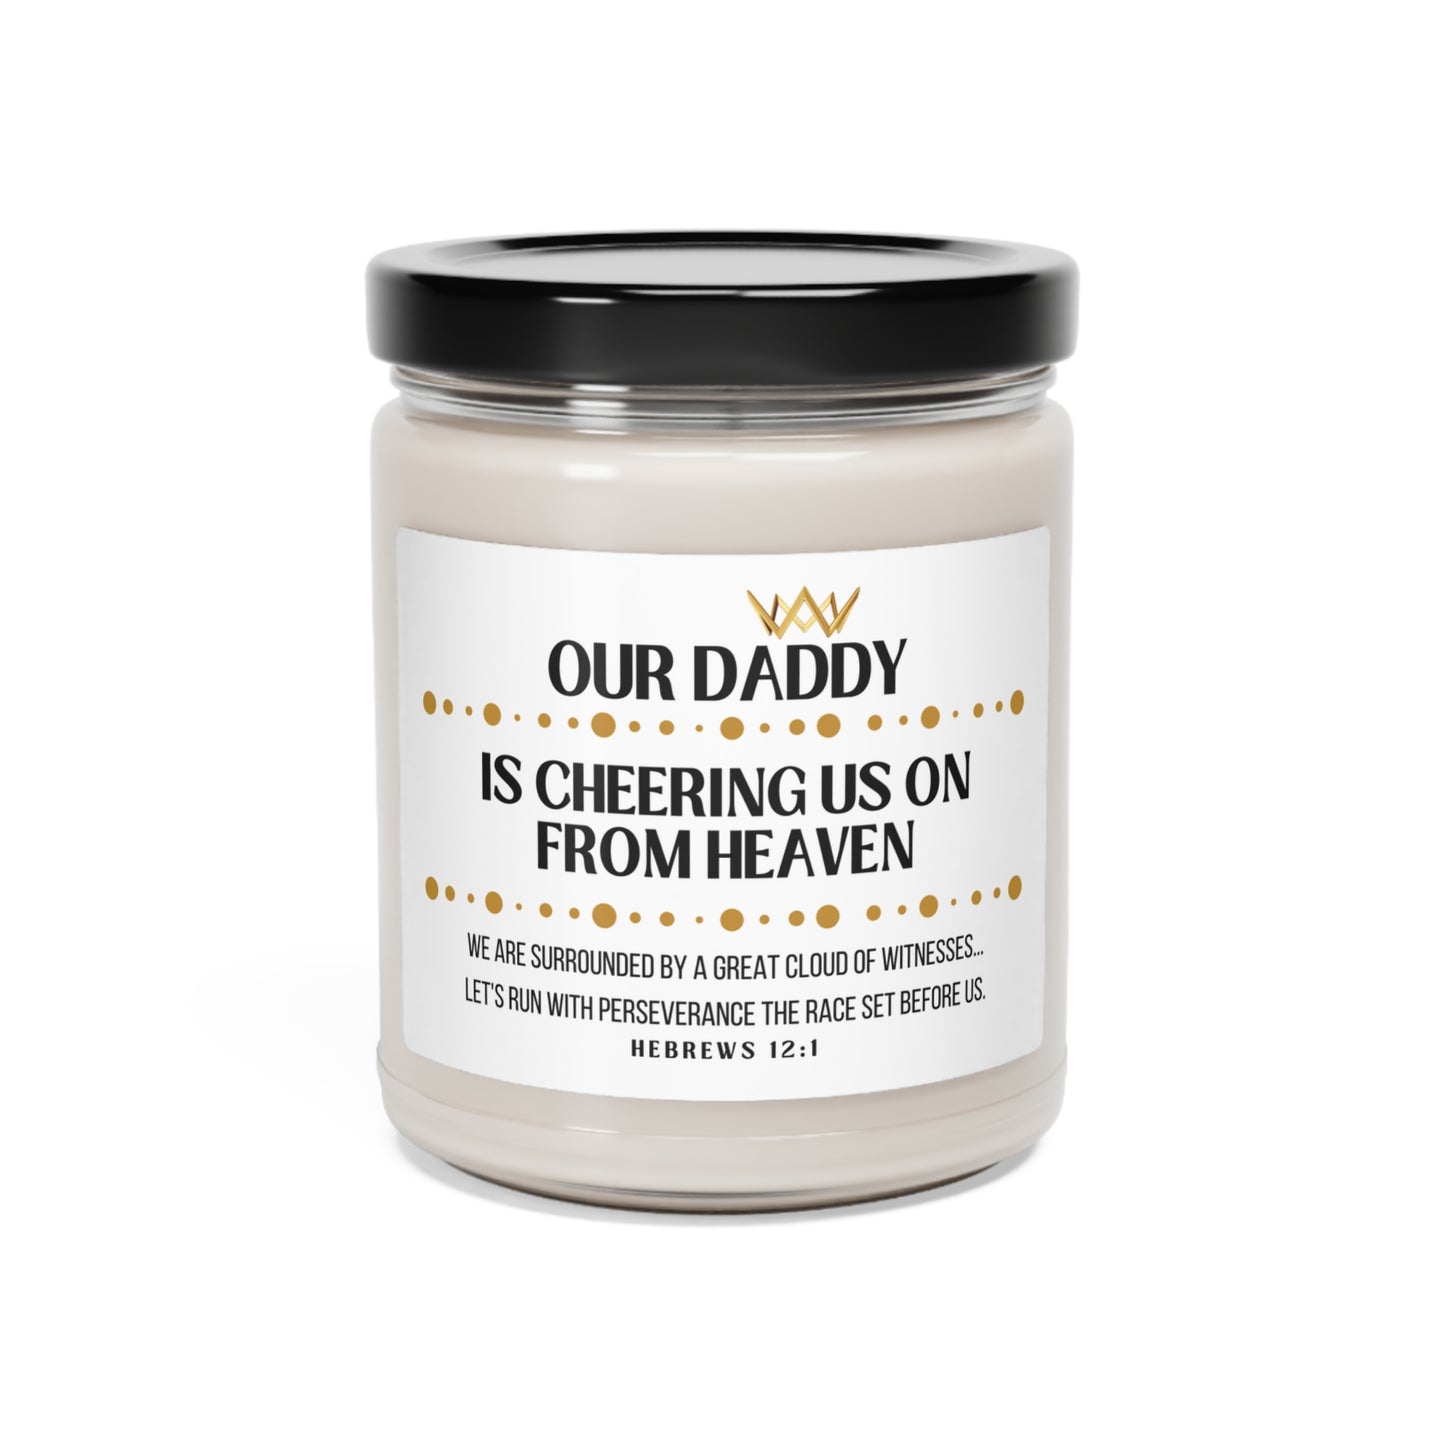 Daddy Memorial Soy Wax Candle, Cheering Us On From Heaven